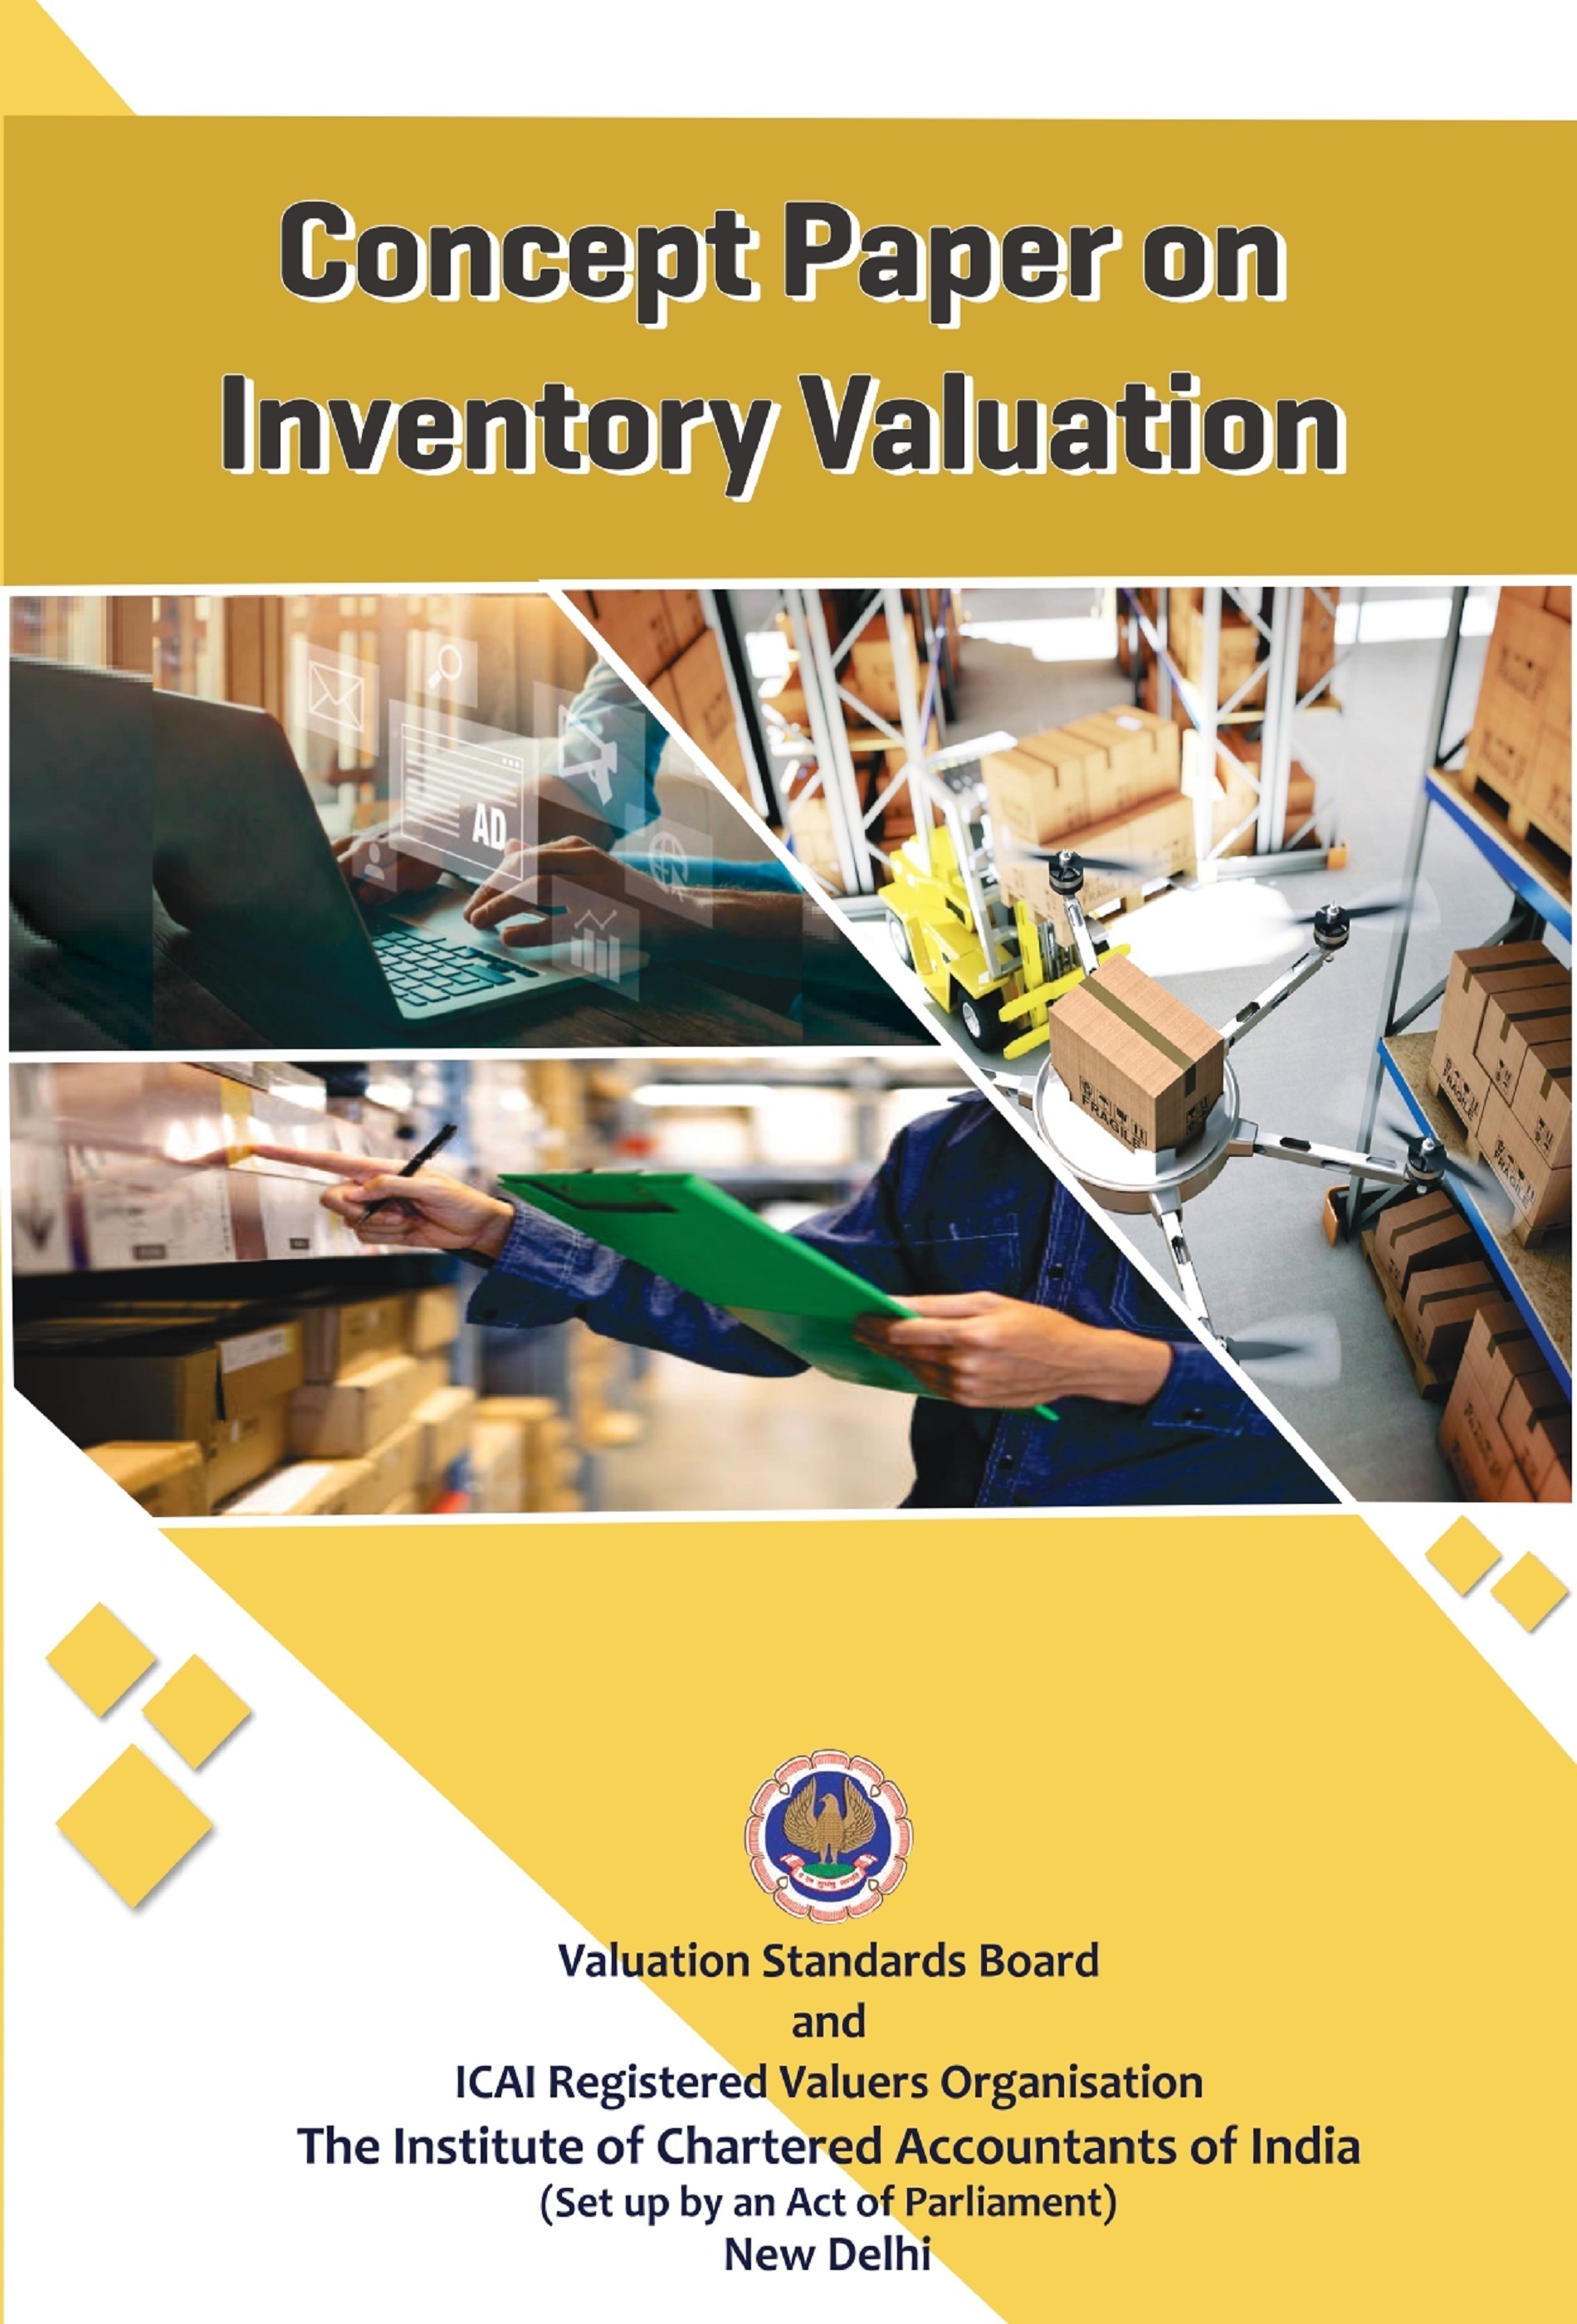 Concept Paper on Inventory Valuation (February, 2022)